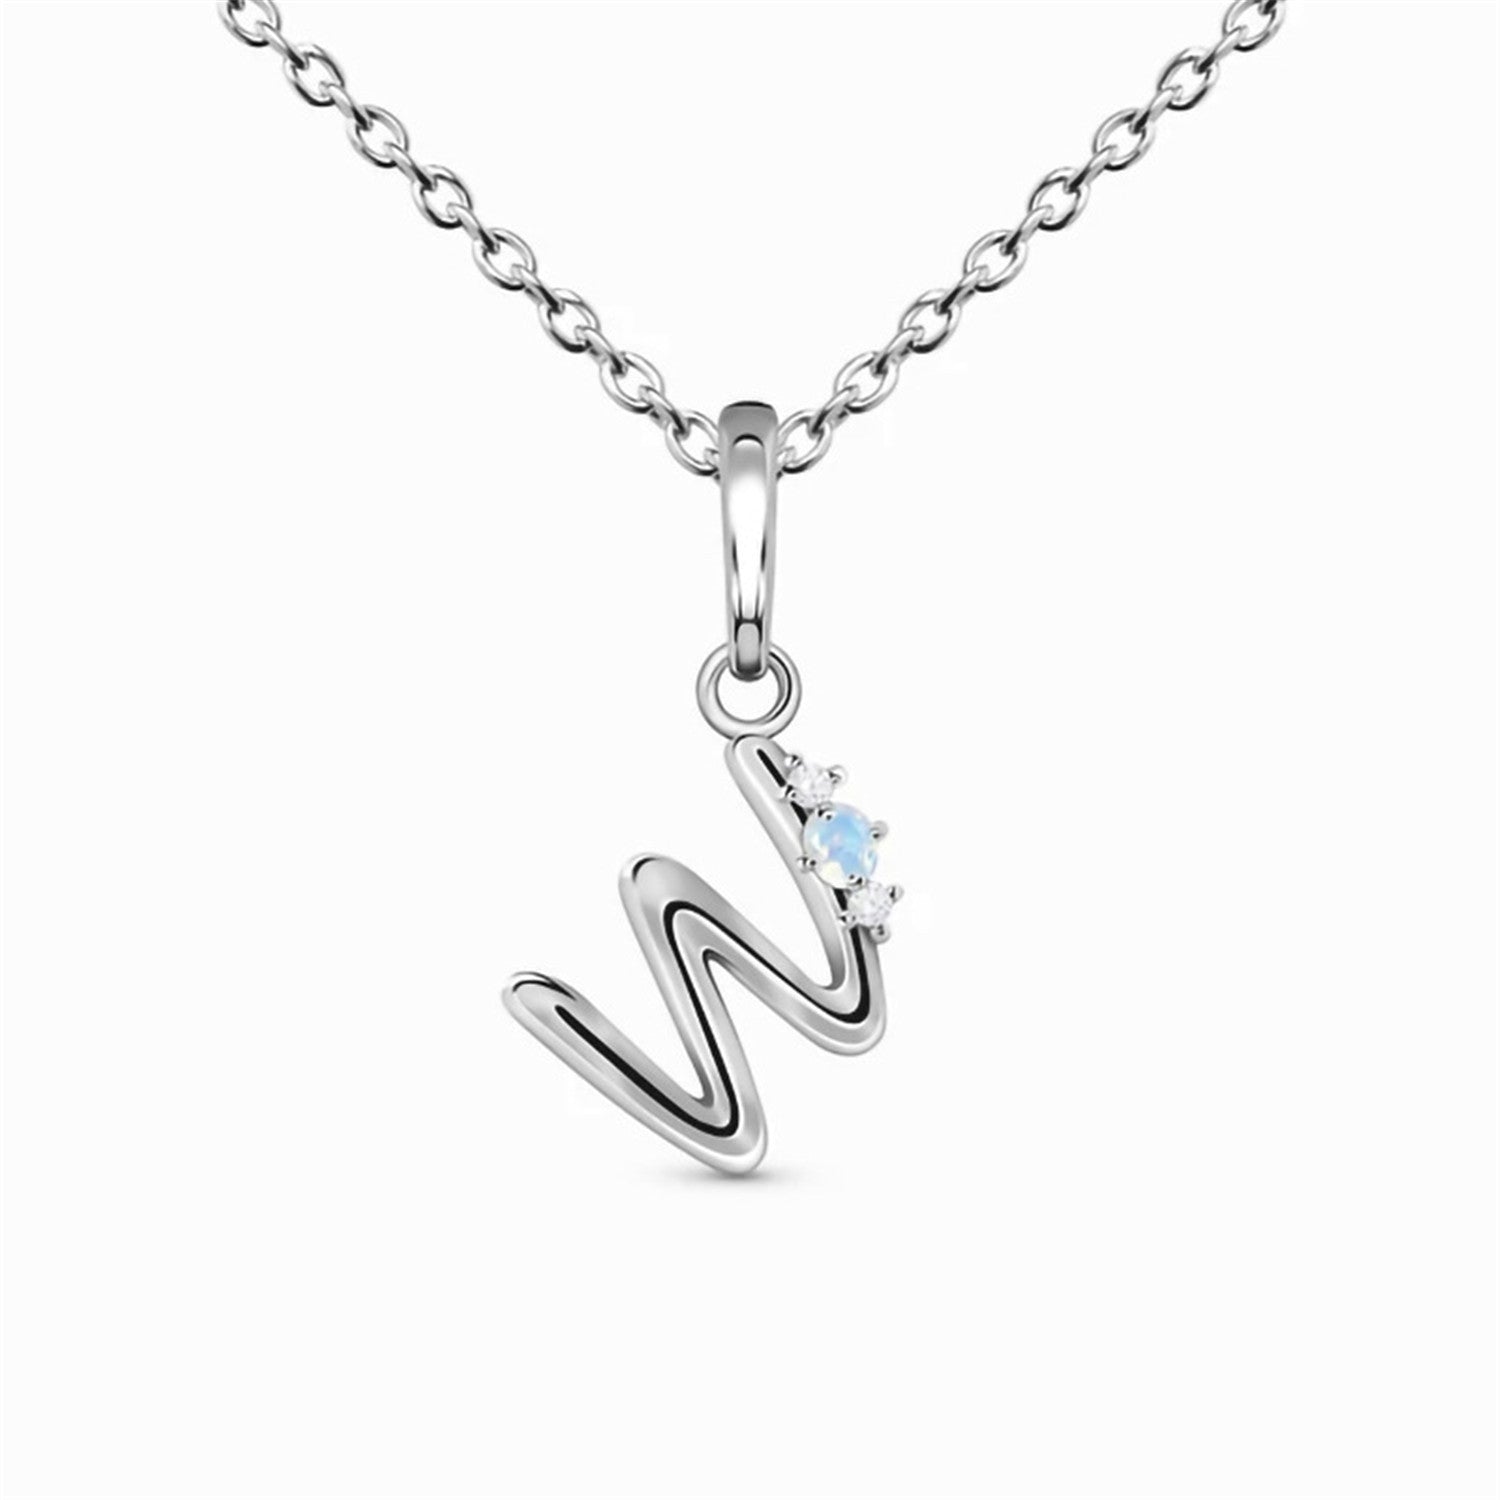 Moonstone Pendant,s925 Silver,With Letter W Design